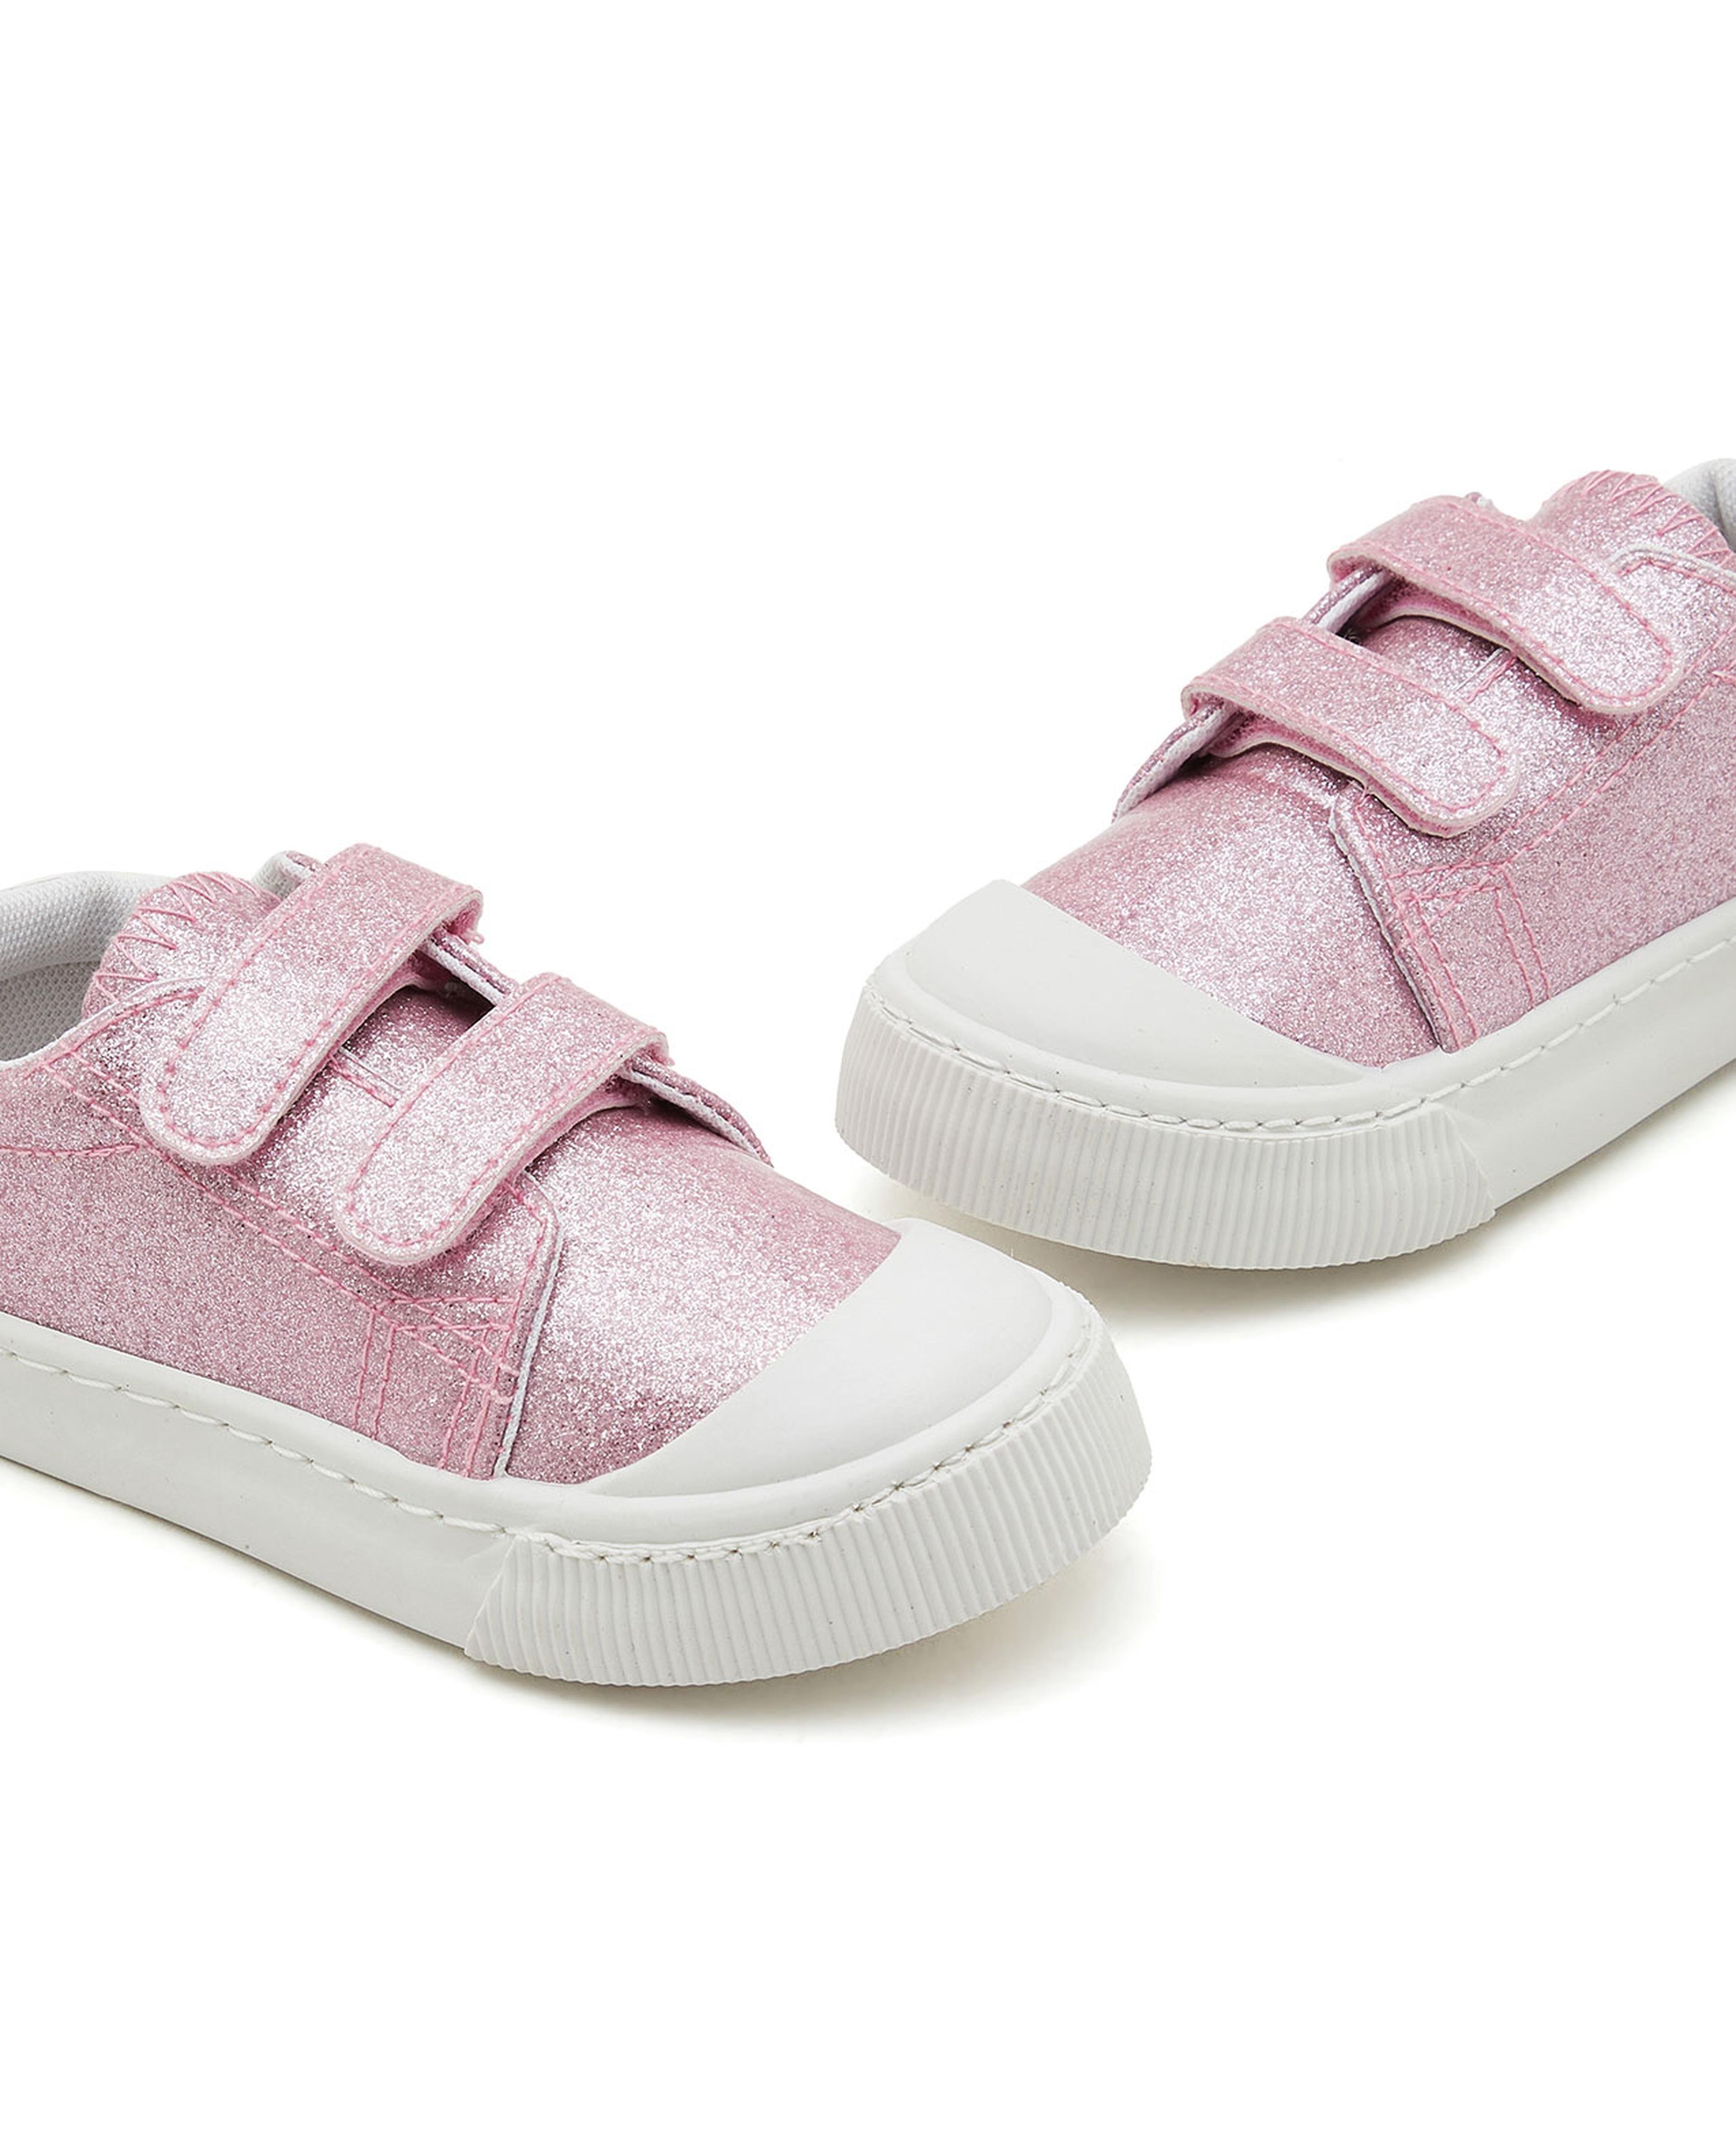 Printed Casual Shoes with Velcro Closure